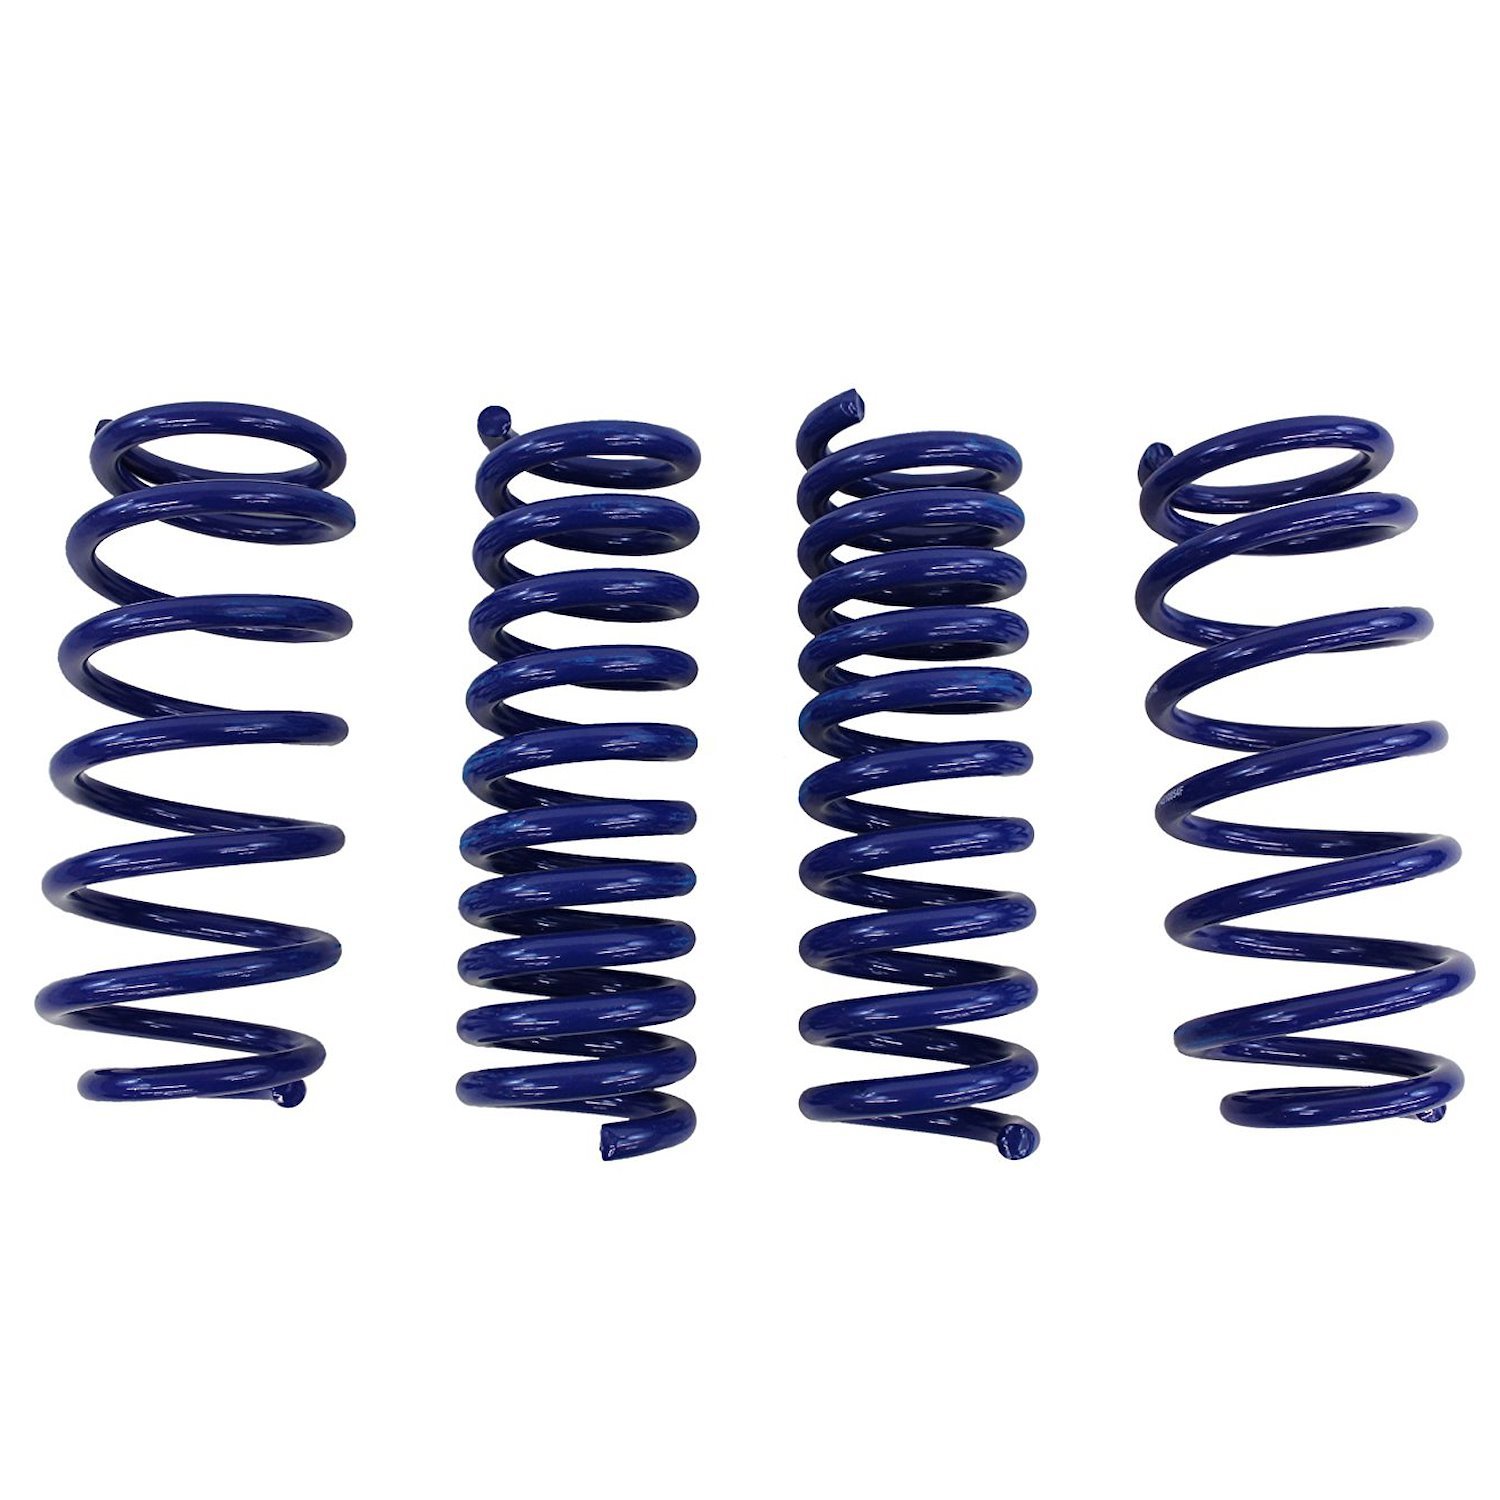 Stage 1 Performance Lowering Springs 2005-10 Charger/300 5.7L RWD